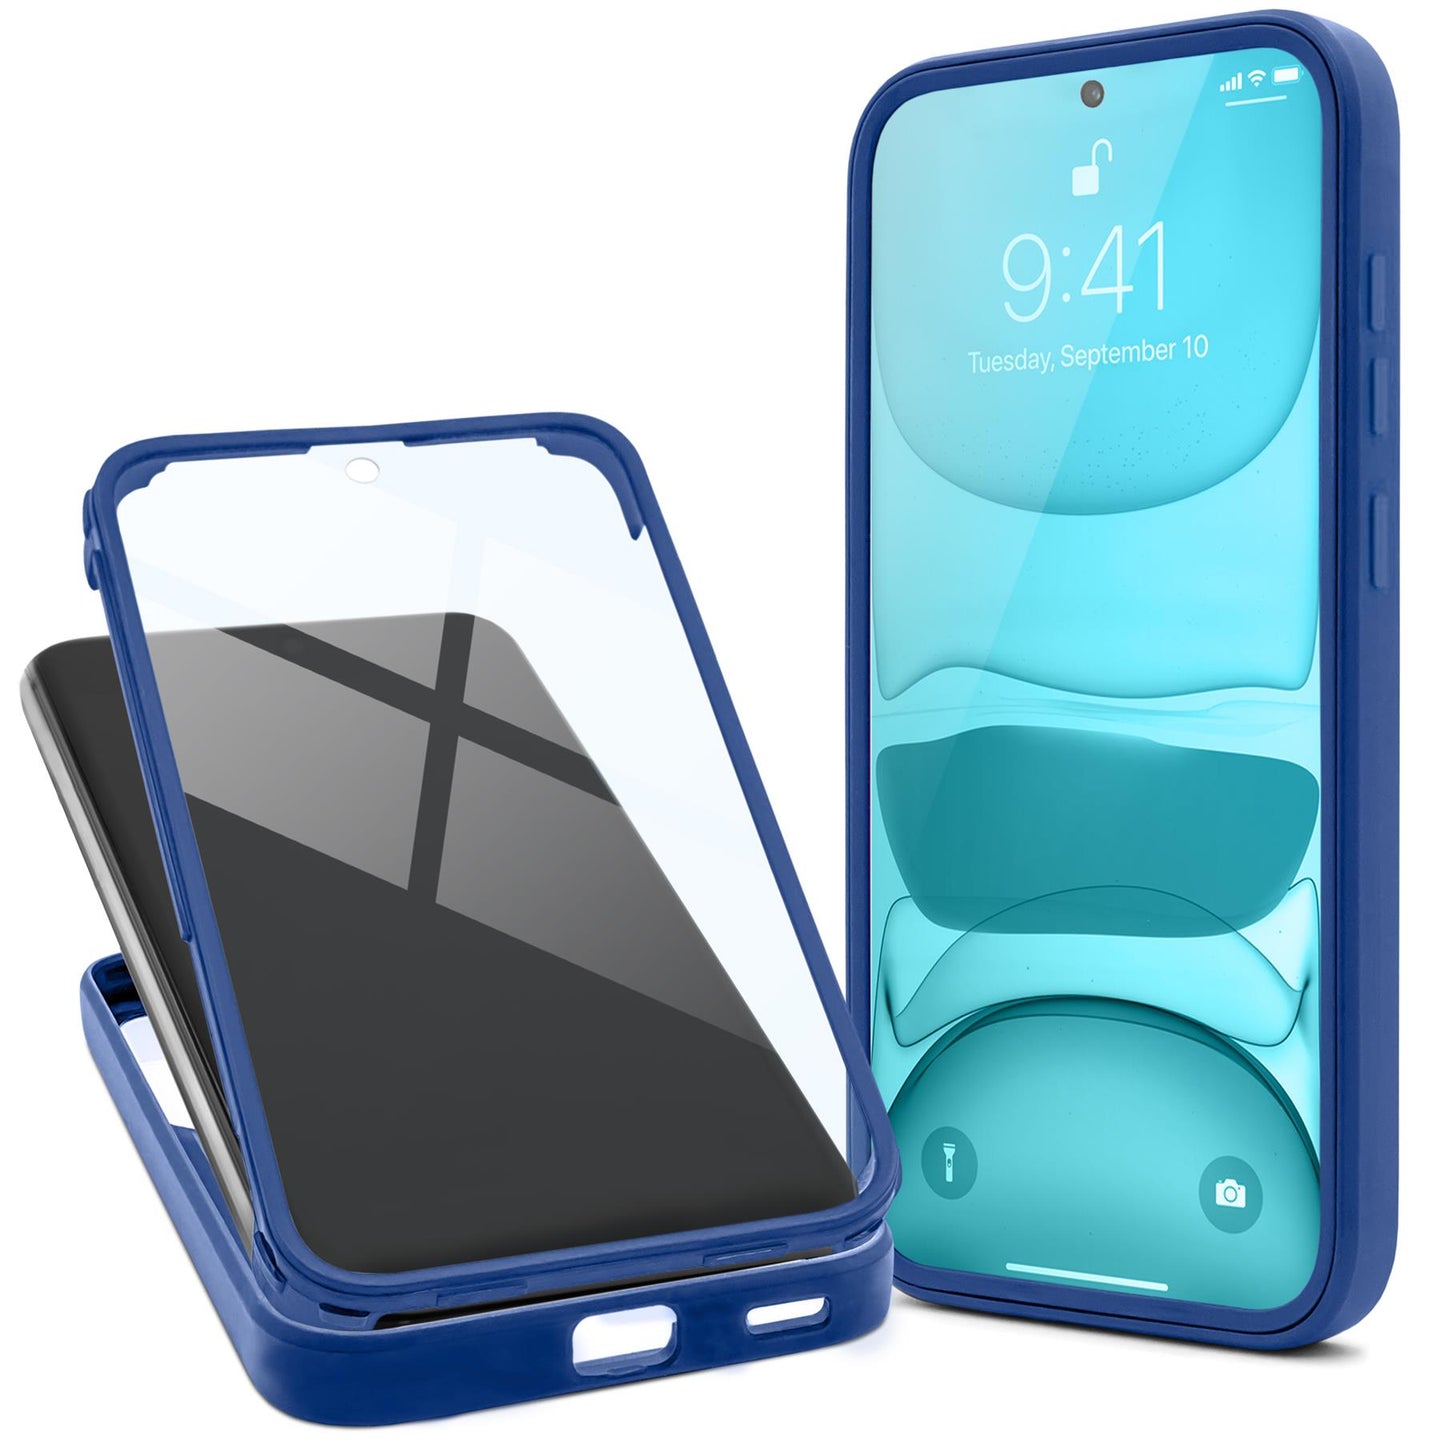 Moozy 360 Case for Samsung S21 5G and 4G - Blue Rim Transparent Case, Full Body Double-sided Protection, Cover with Built-in Screen Protector